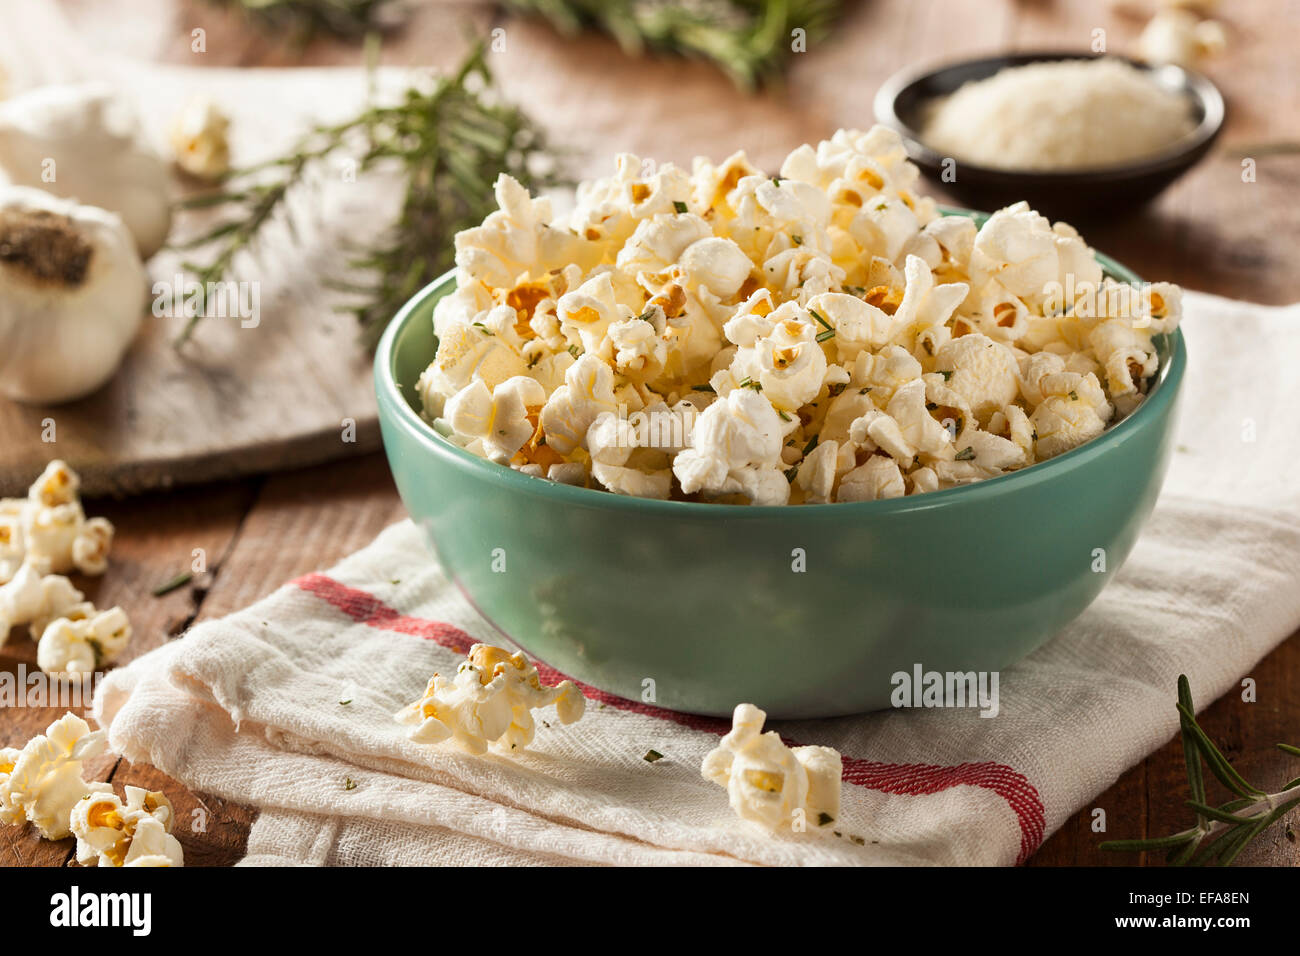 Homemade Rosemary Herb and Cheese Popcorn in a Bowl Stock Photo